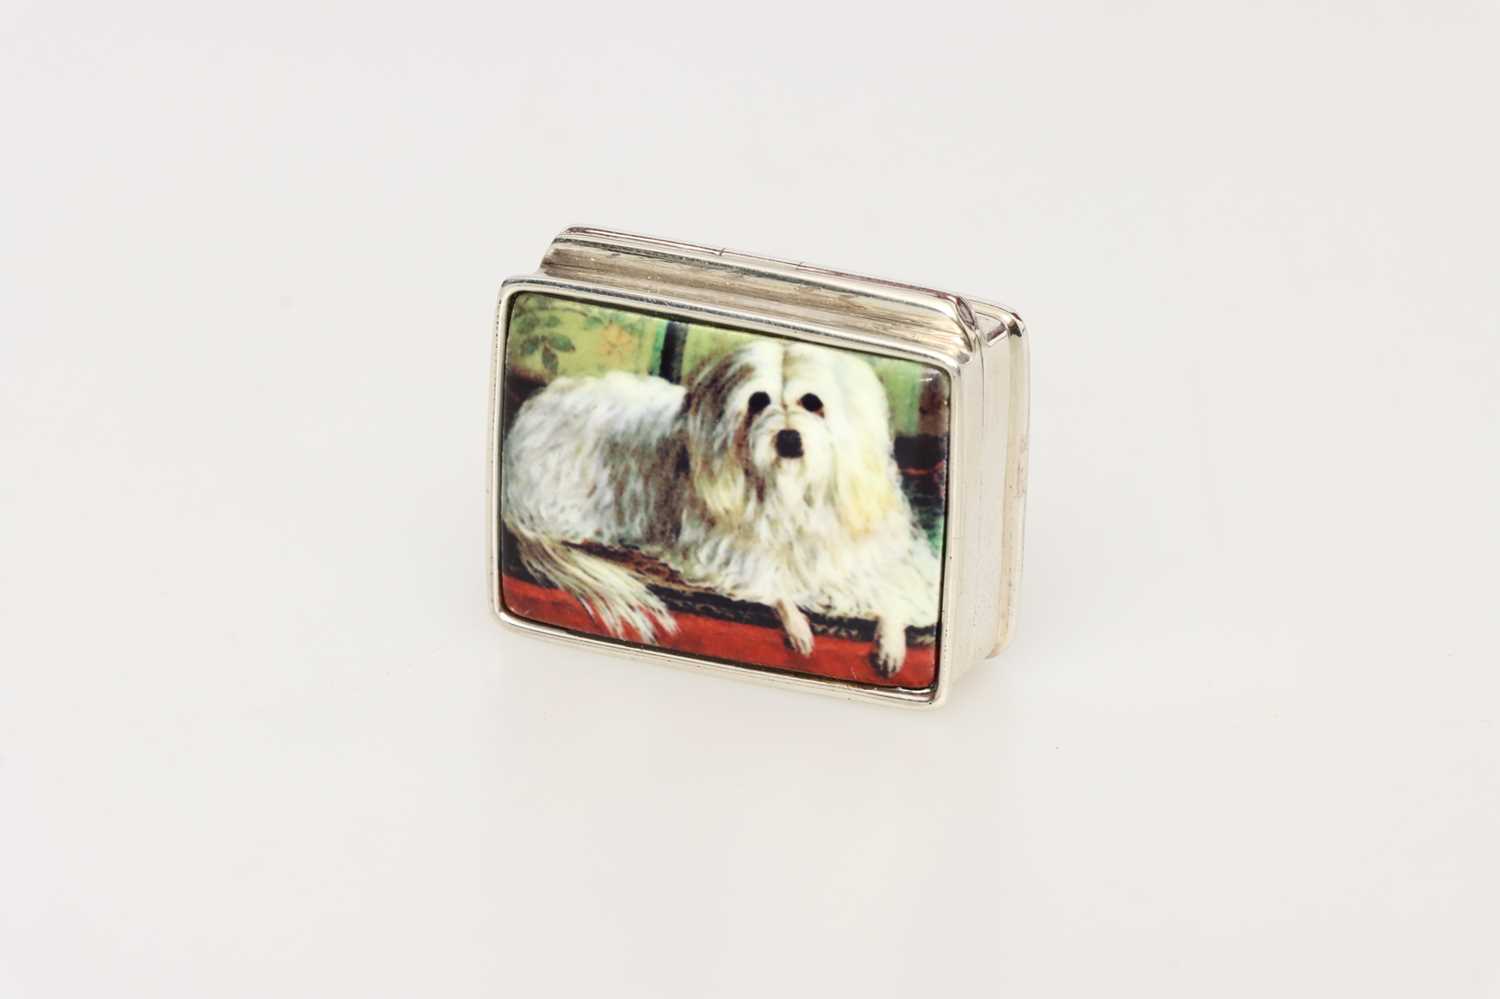 Lot 165 - A Silver Pill Box Decorated with Bolognese Terrier